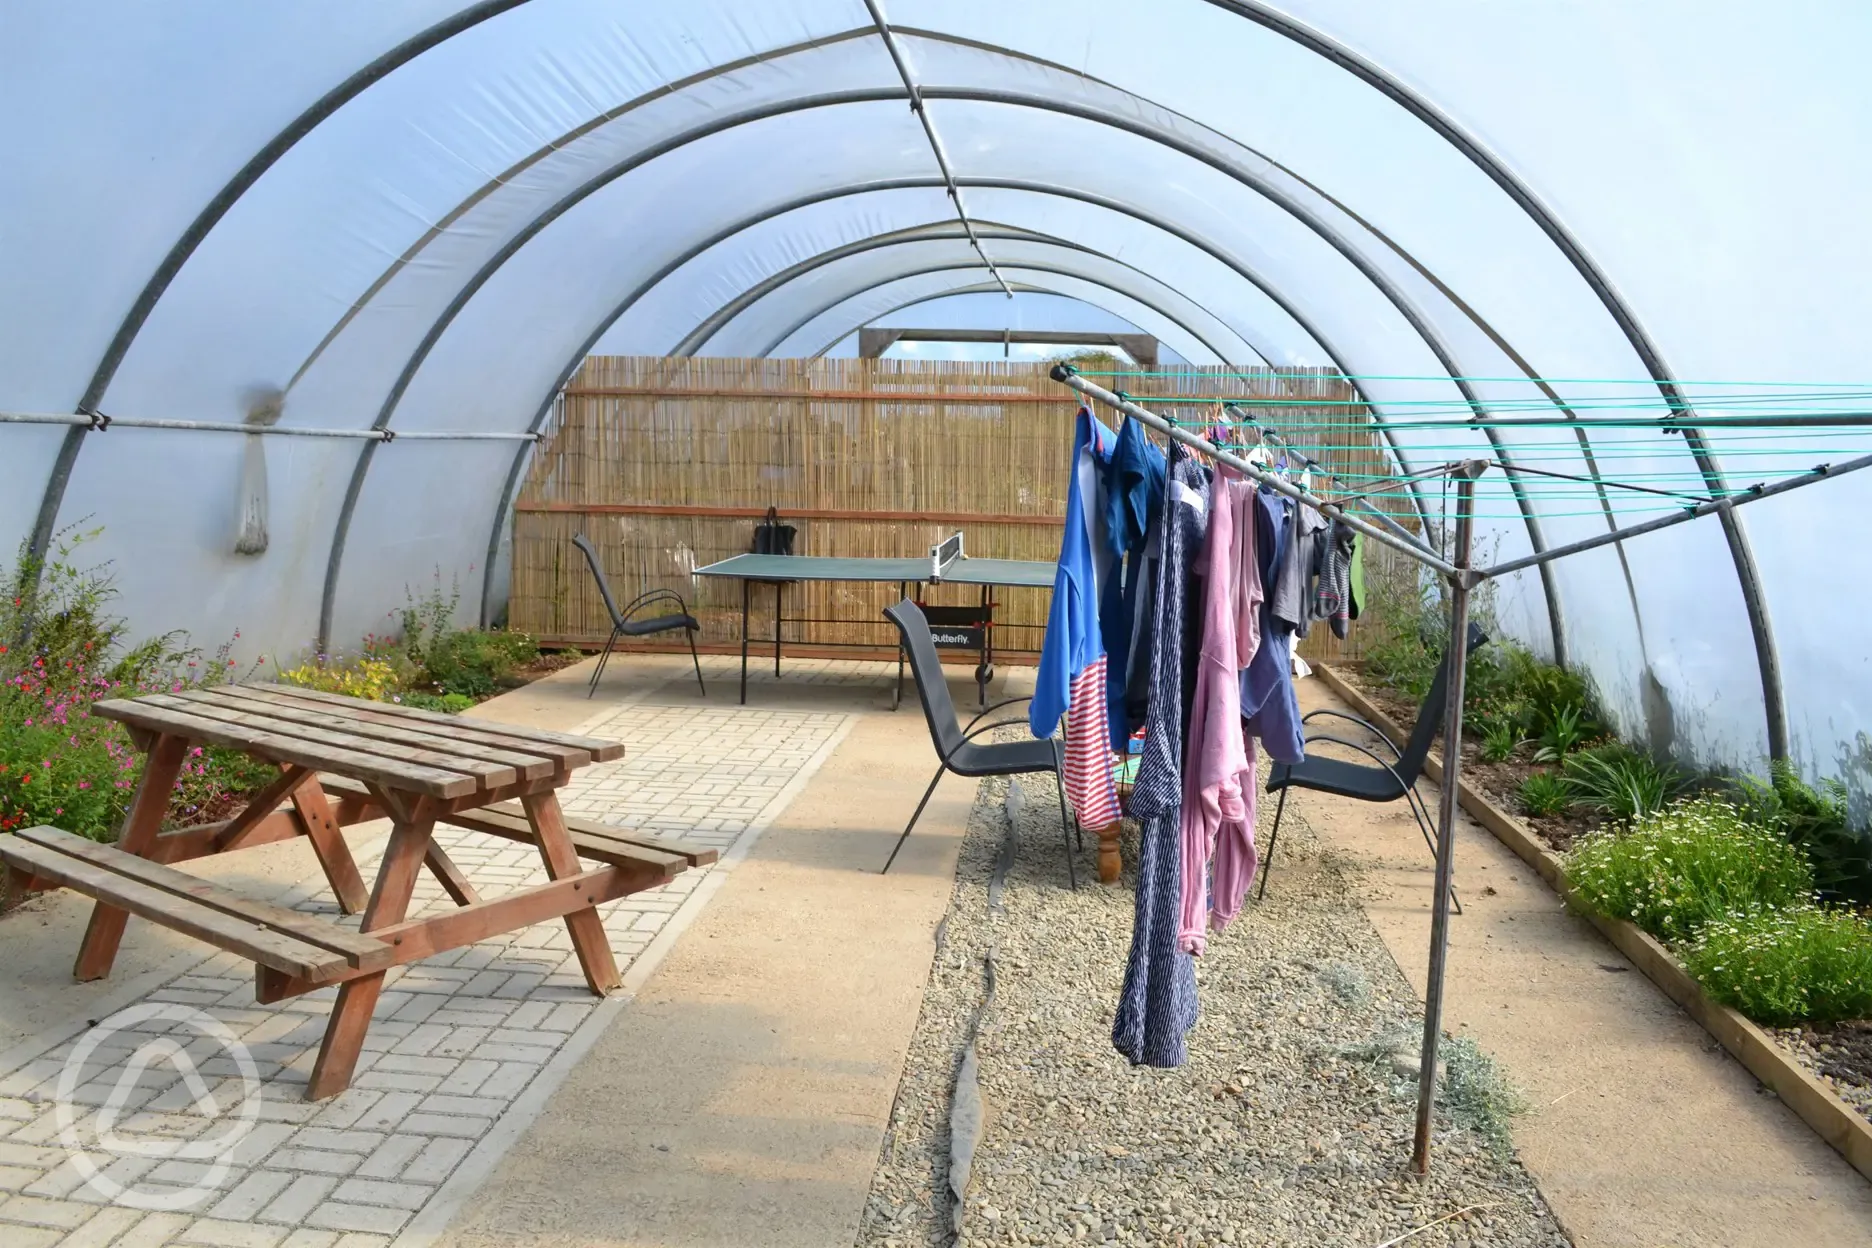 Campers polytunnel space with table tennis and washing line